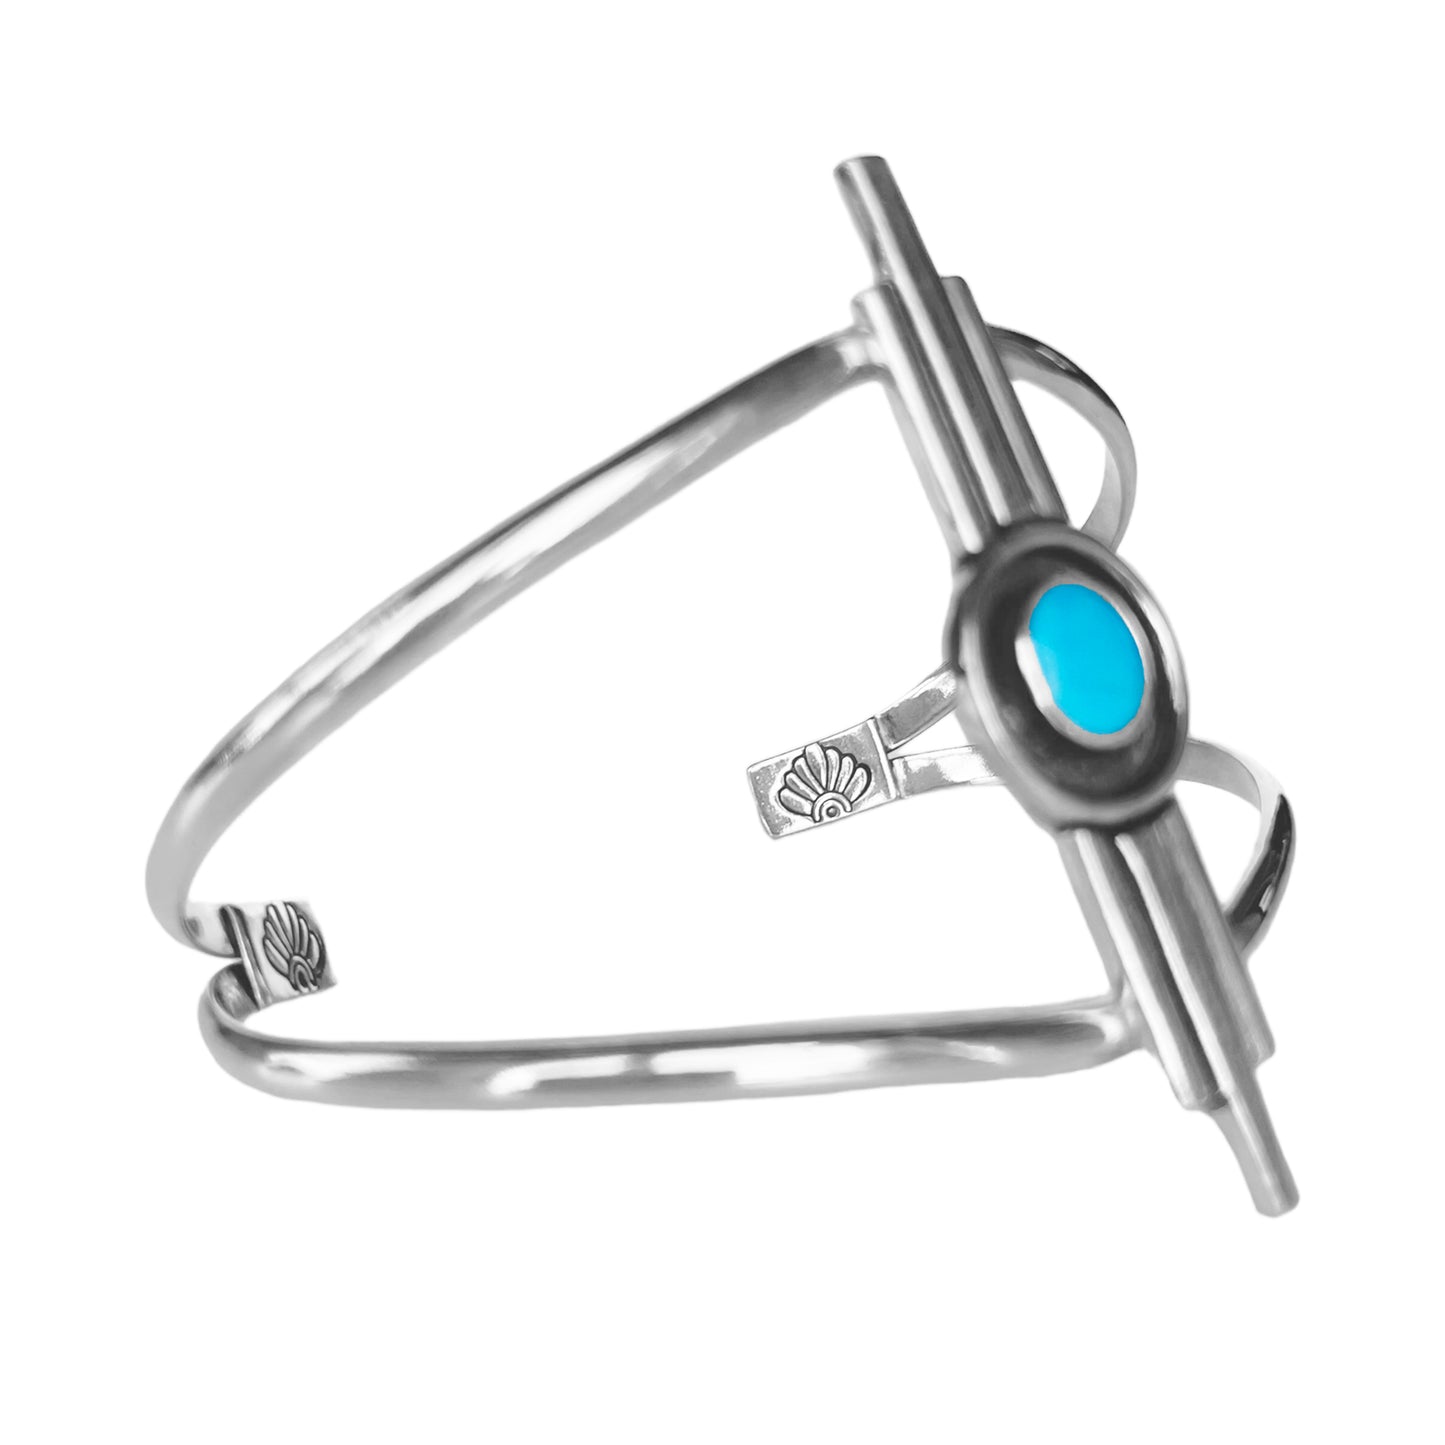 Art Deco inspired sterling silver cuff bracelet. The focal is a 3 bar design with the middle bar slightly longer than the 2 side bars. The middle contains a round turquoise stone encircled with a black patina. The cuff features a double band with stamped accents on the ends. Side view of cuff.